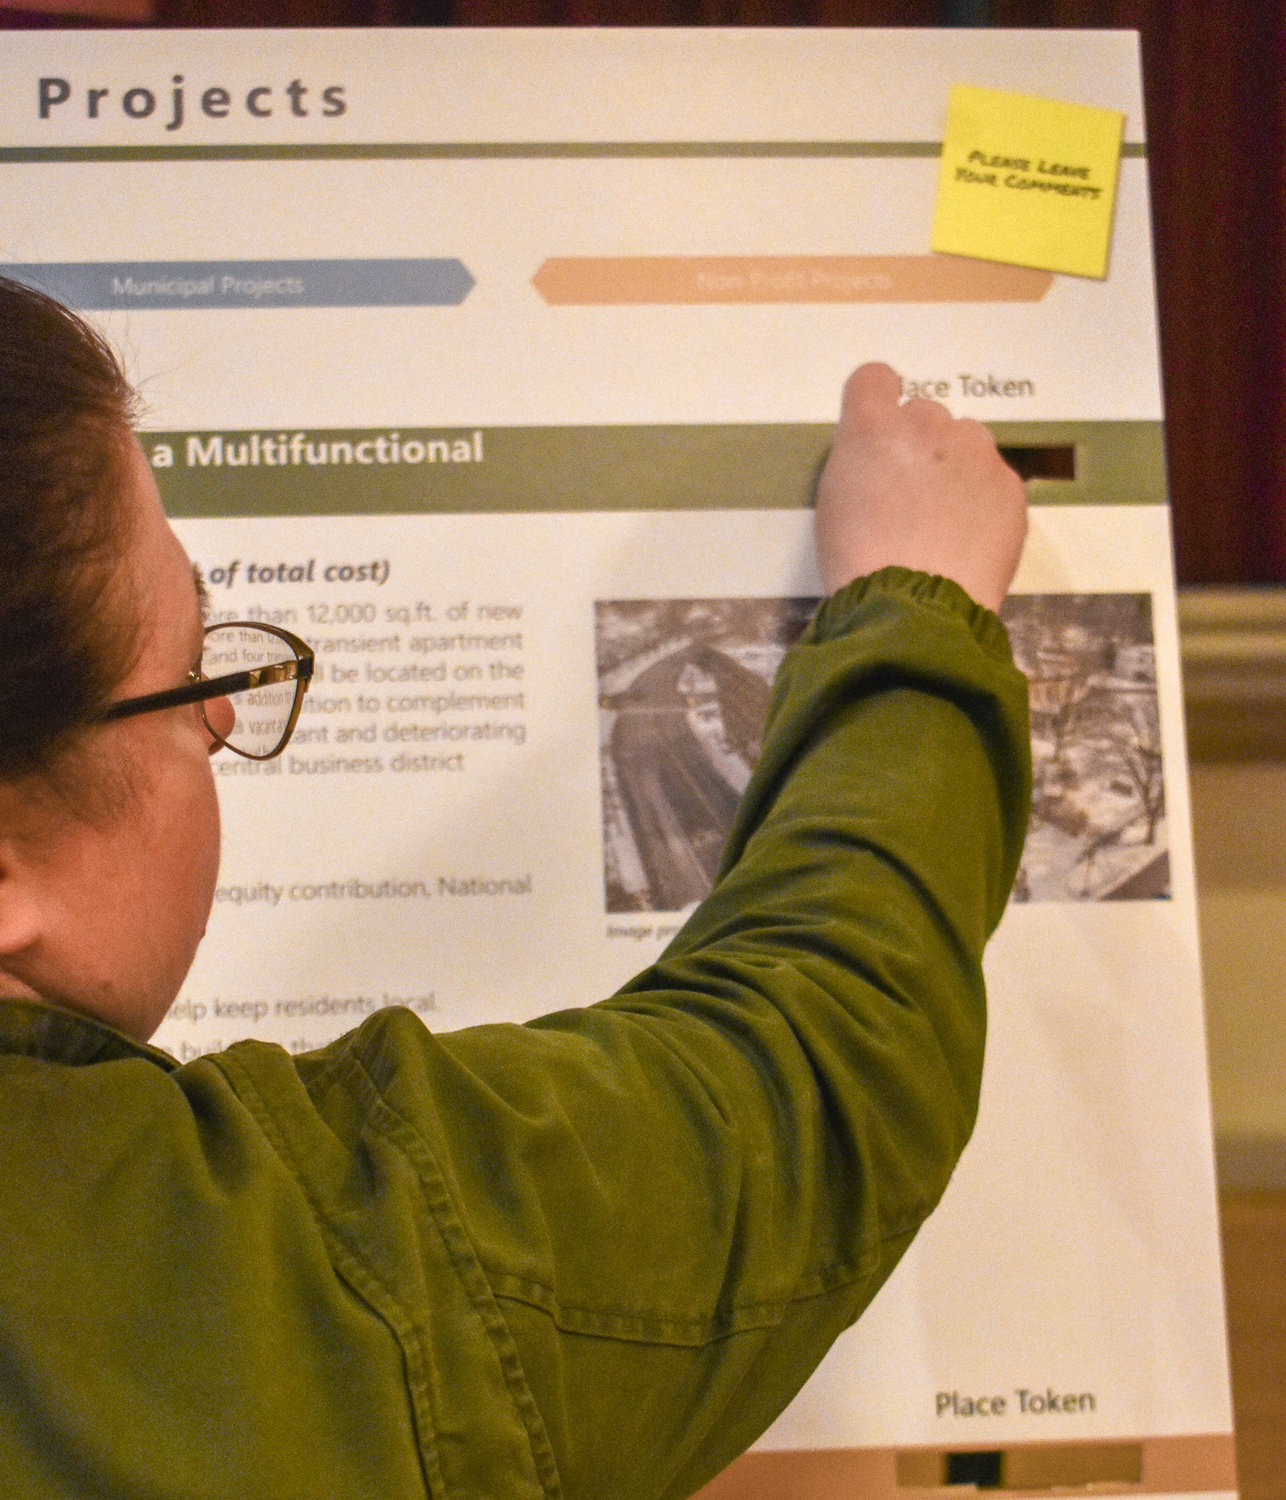 Guests were each given 10 tokens they could use to vote for their favorite DRI project proposals. As seen here, a guest drops one of their tokens into a project's slot.